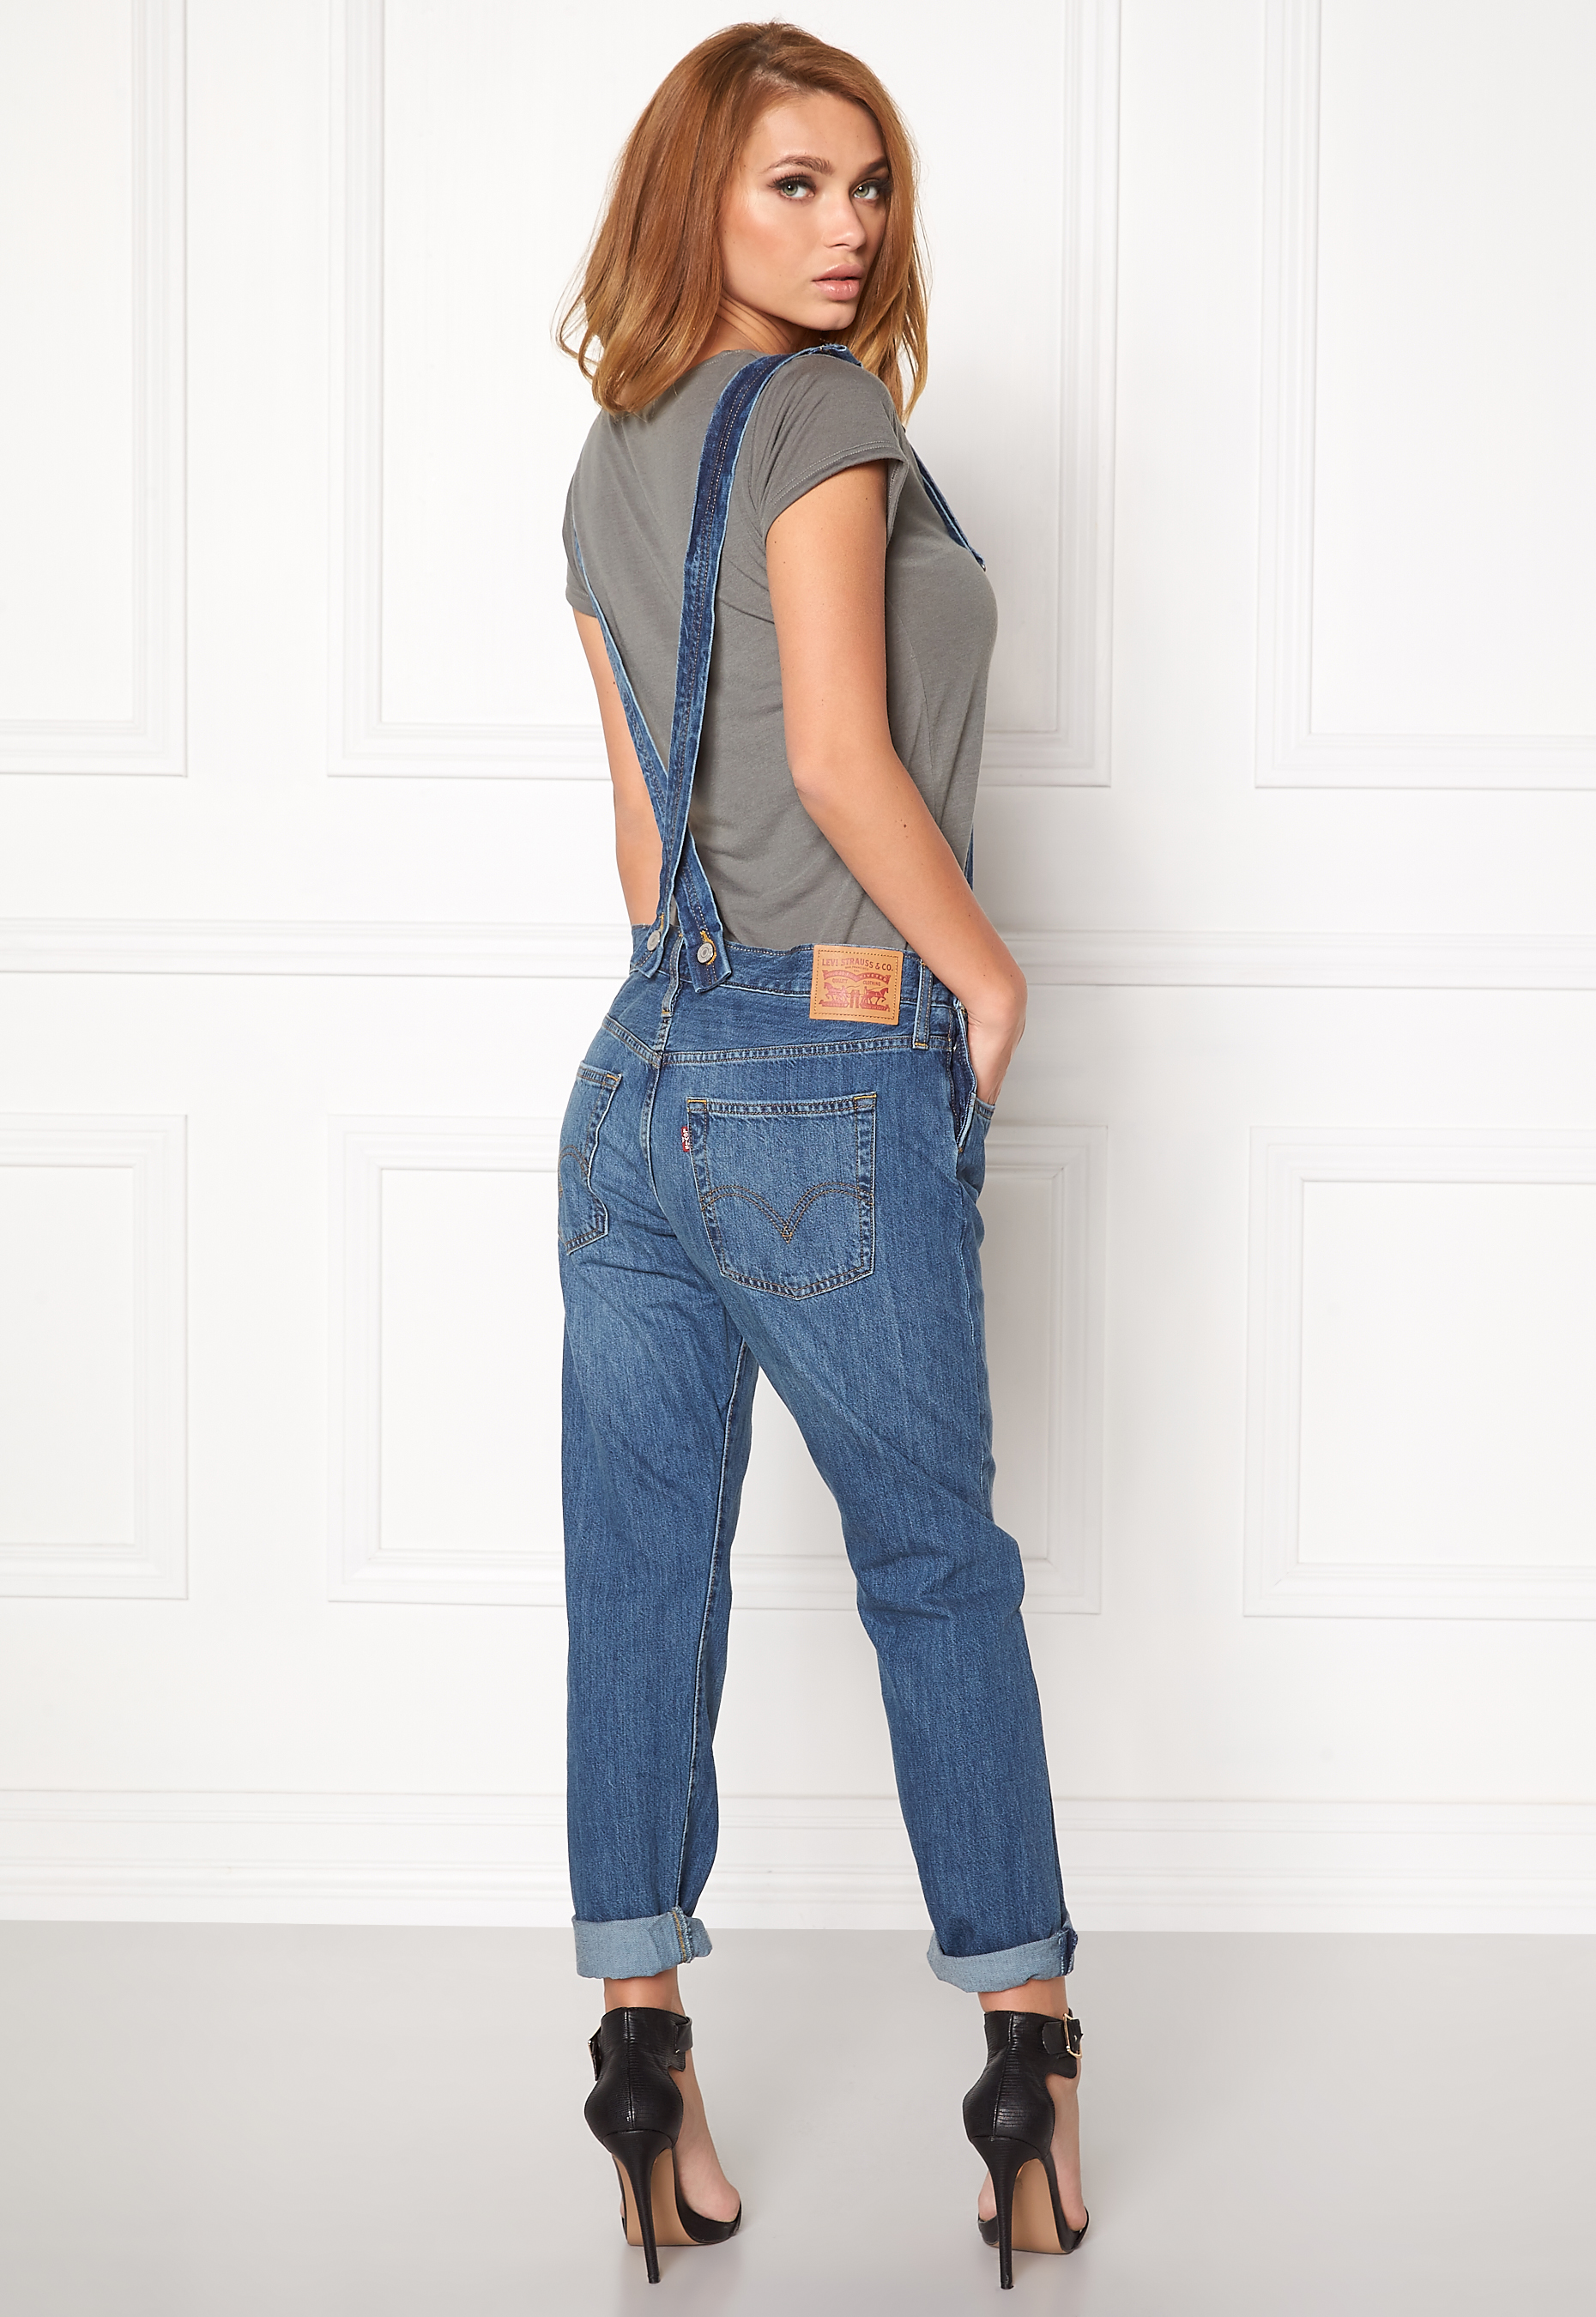 LEVI'S Heritage Overalls 0000 Blue Gold 